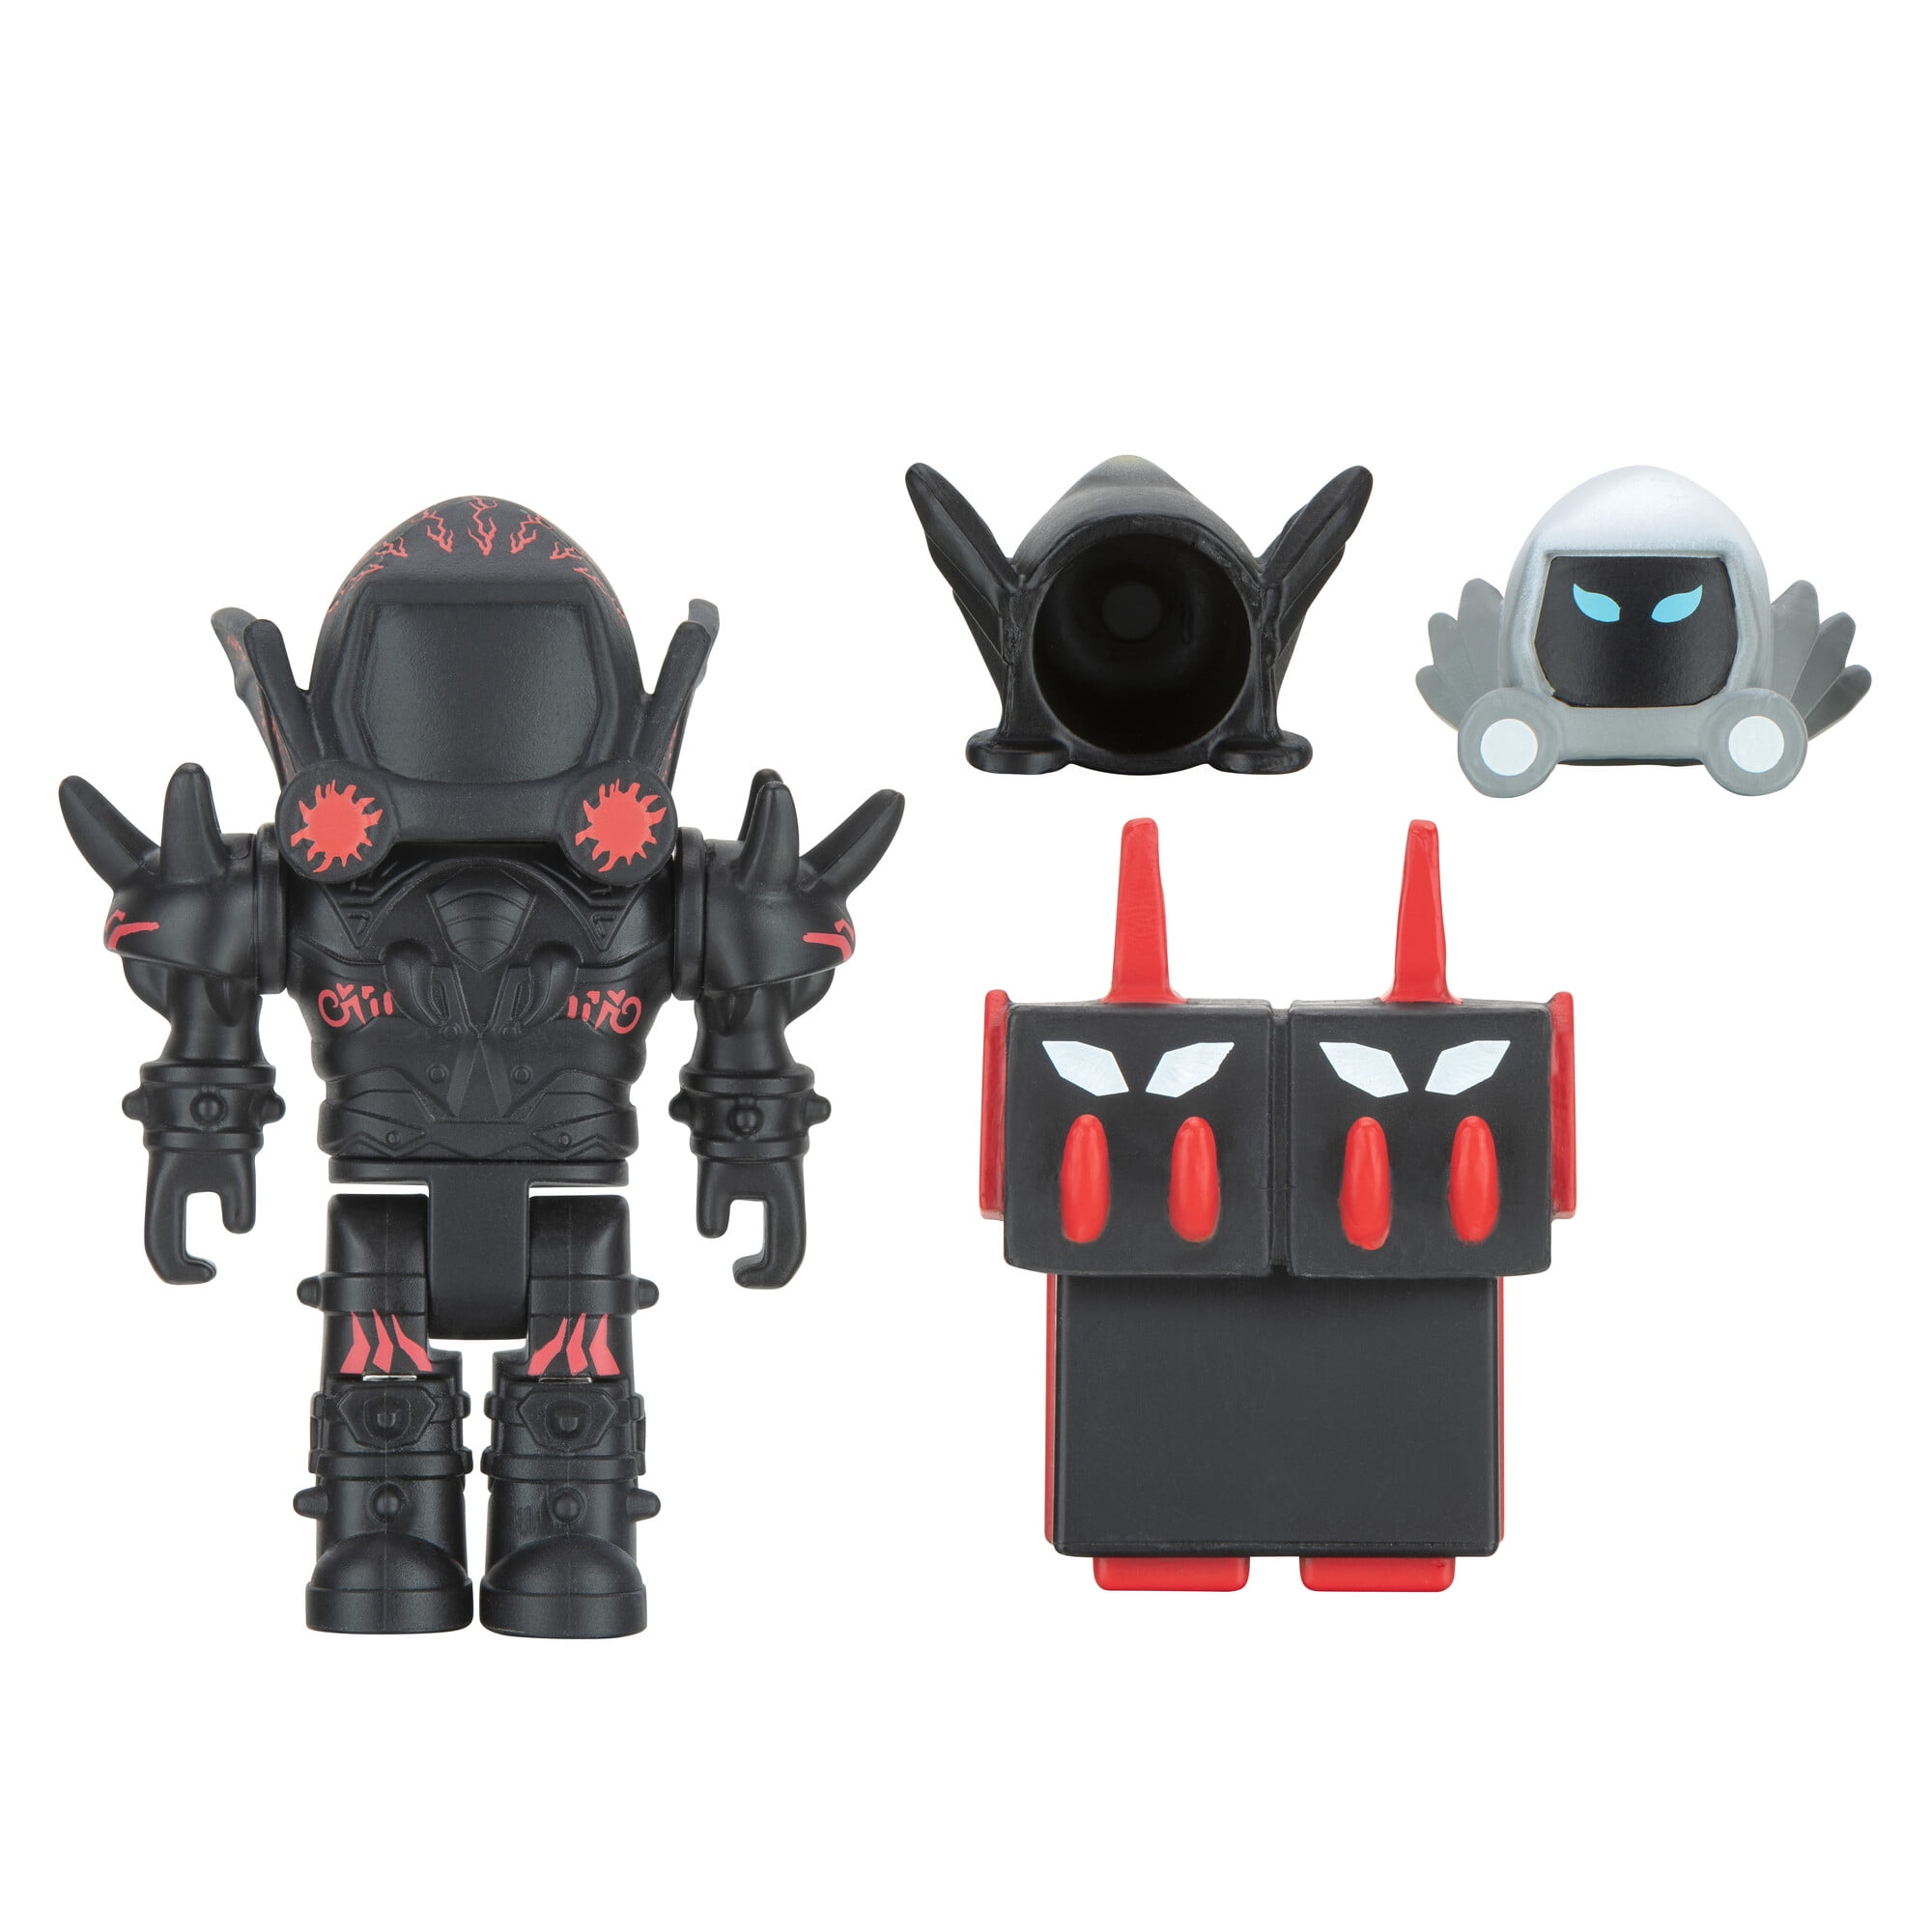 15 Roblox Dominus ideas  roblox, roblox animation, roblox gifts